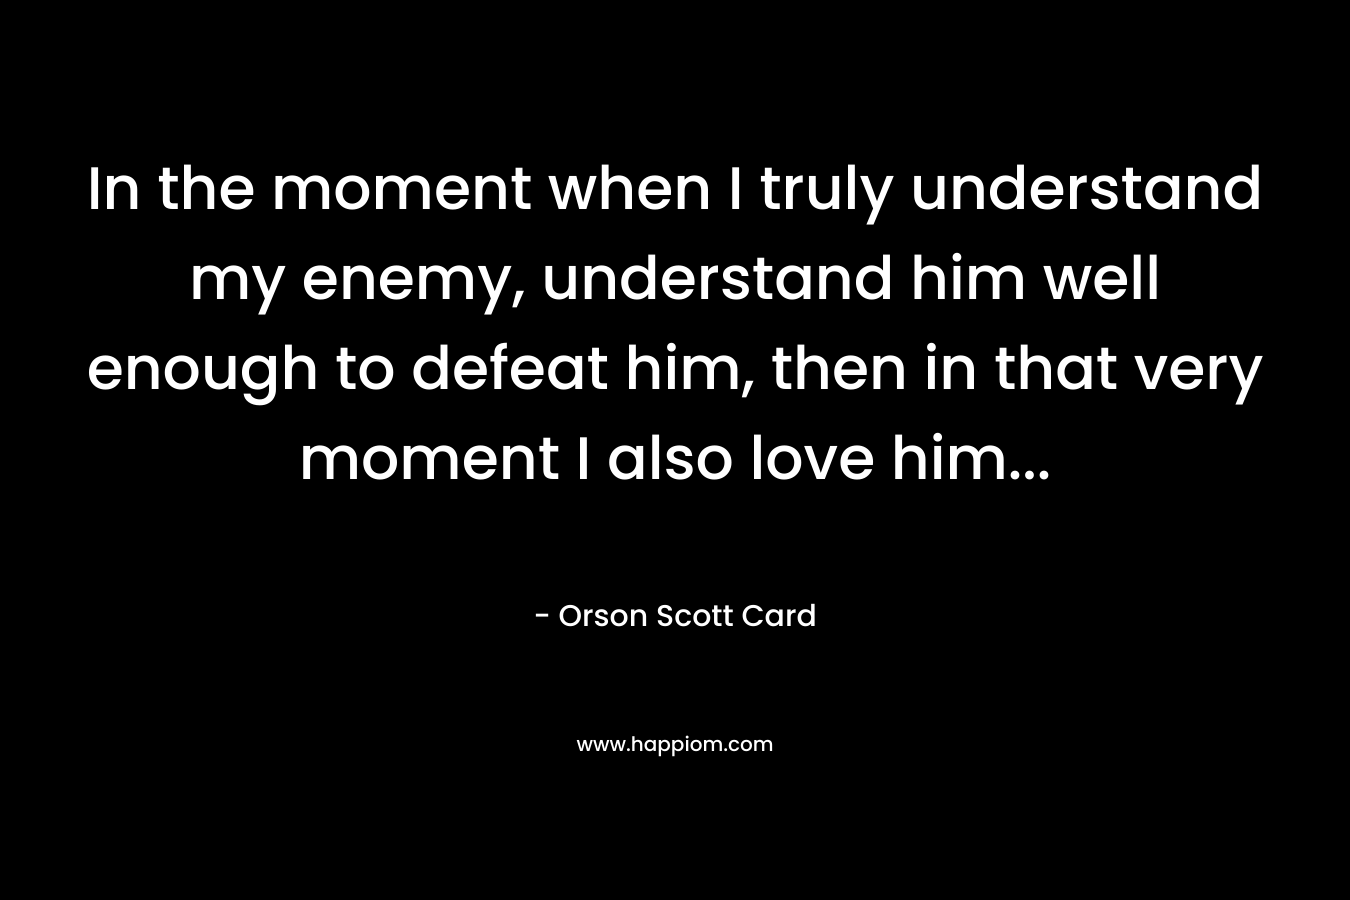 In the moment when I truly understand my enemy, understand him well enough to defeat him, then in that very moment I also love him...